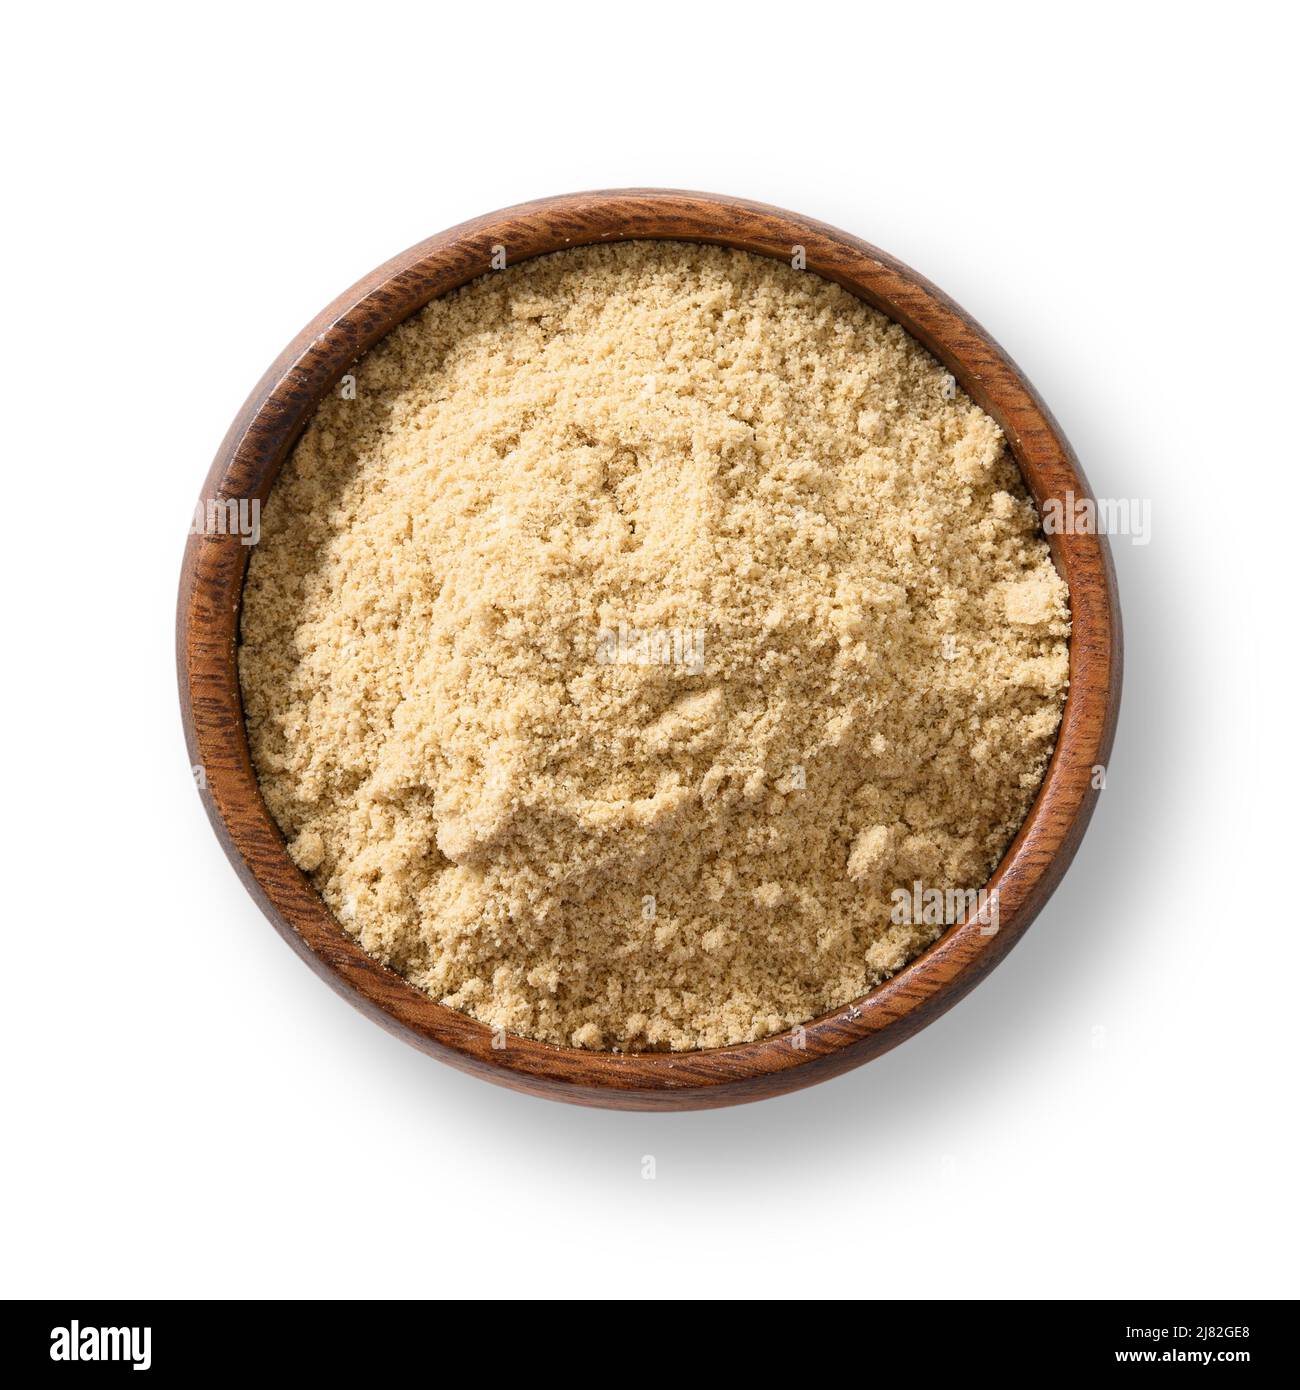 Sesame flour in wooden bowl on white background. View from above. Stock Photo